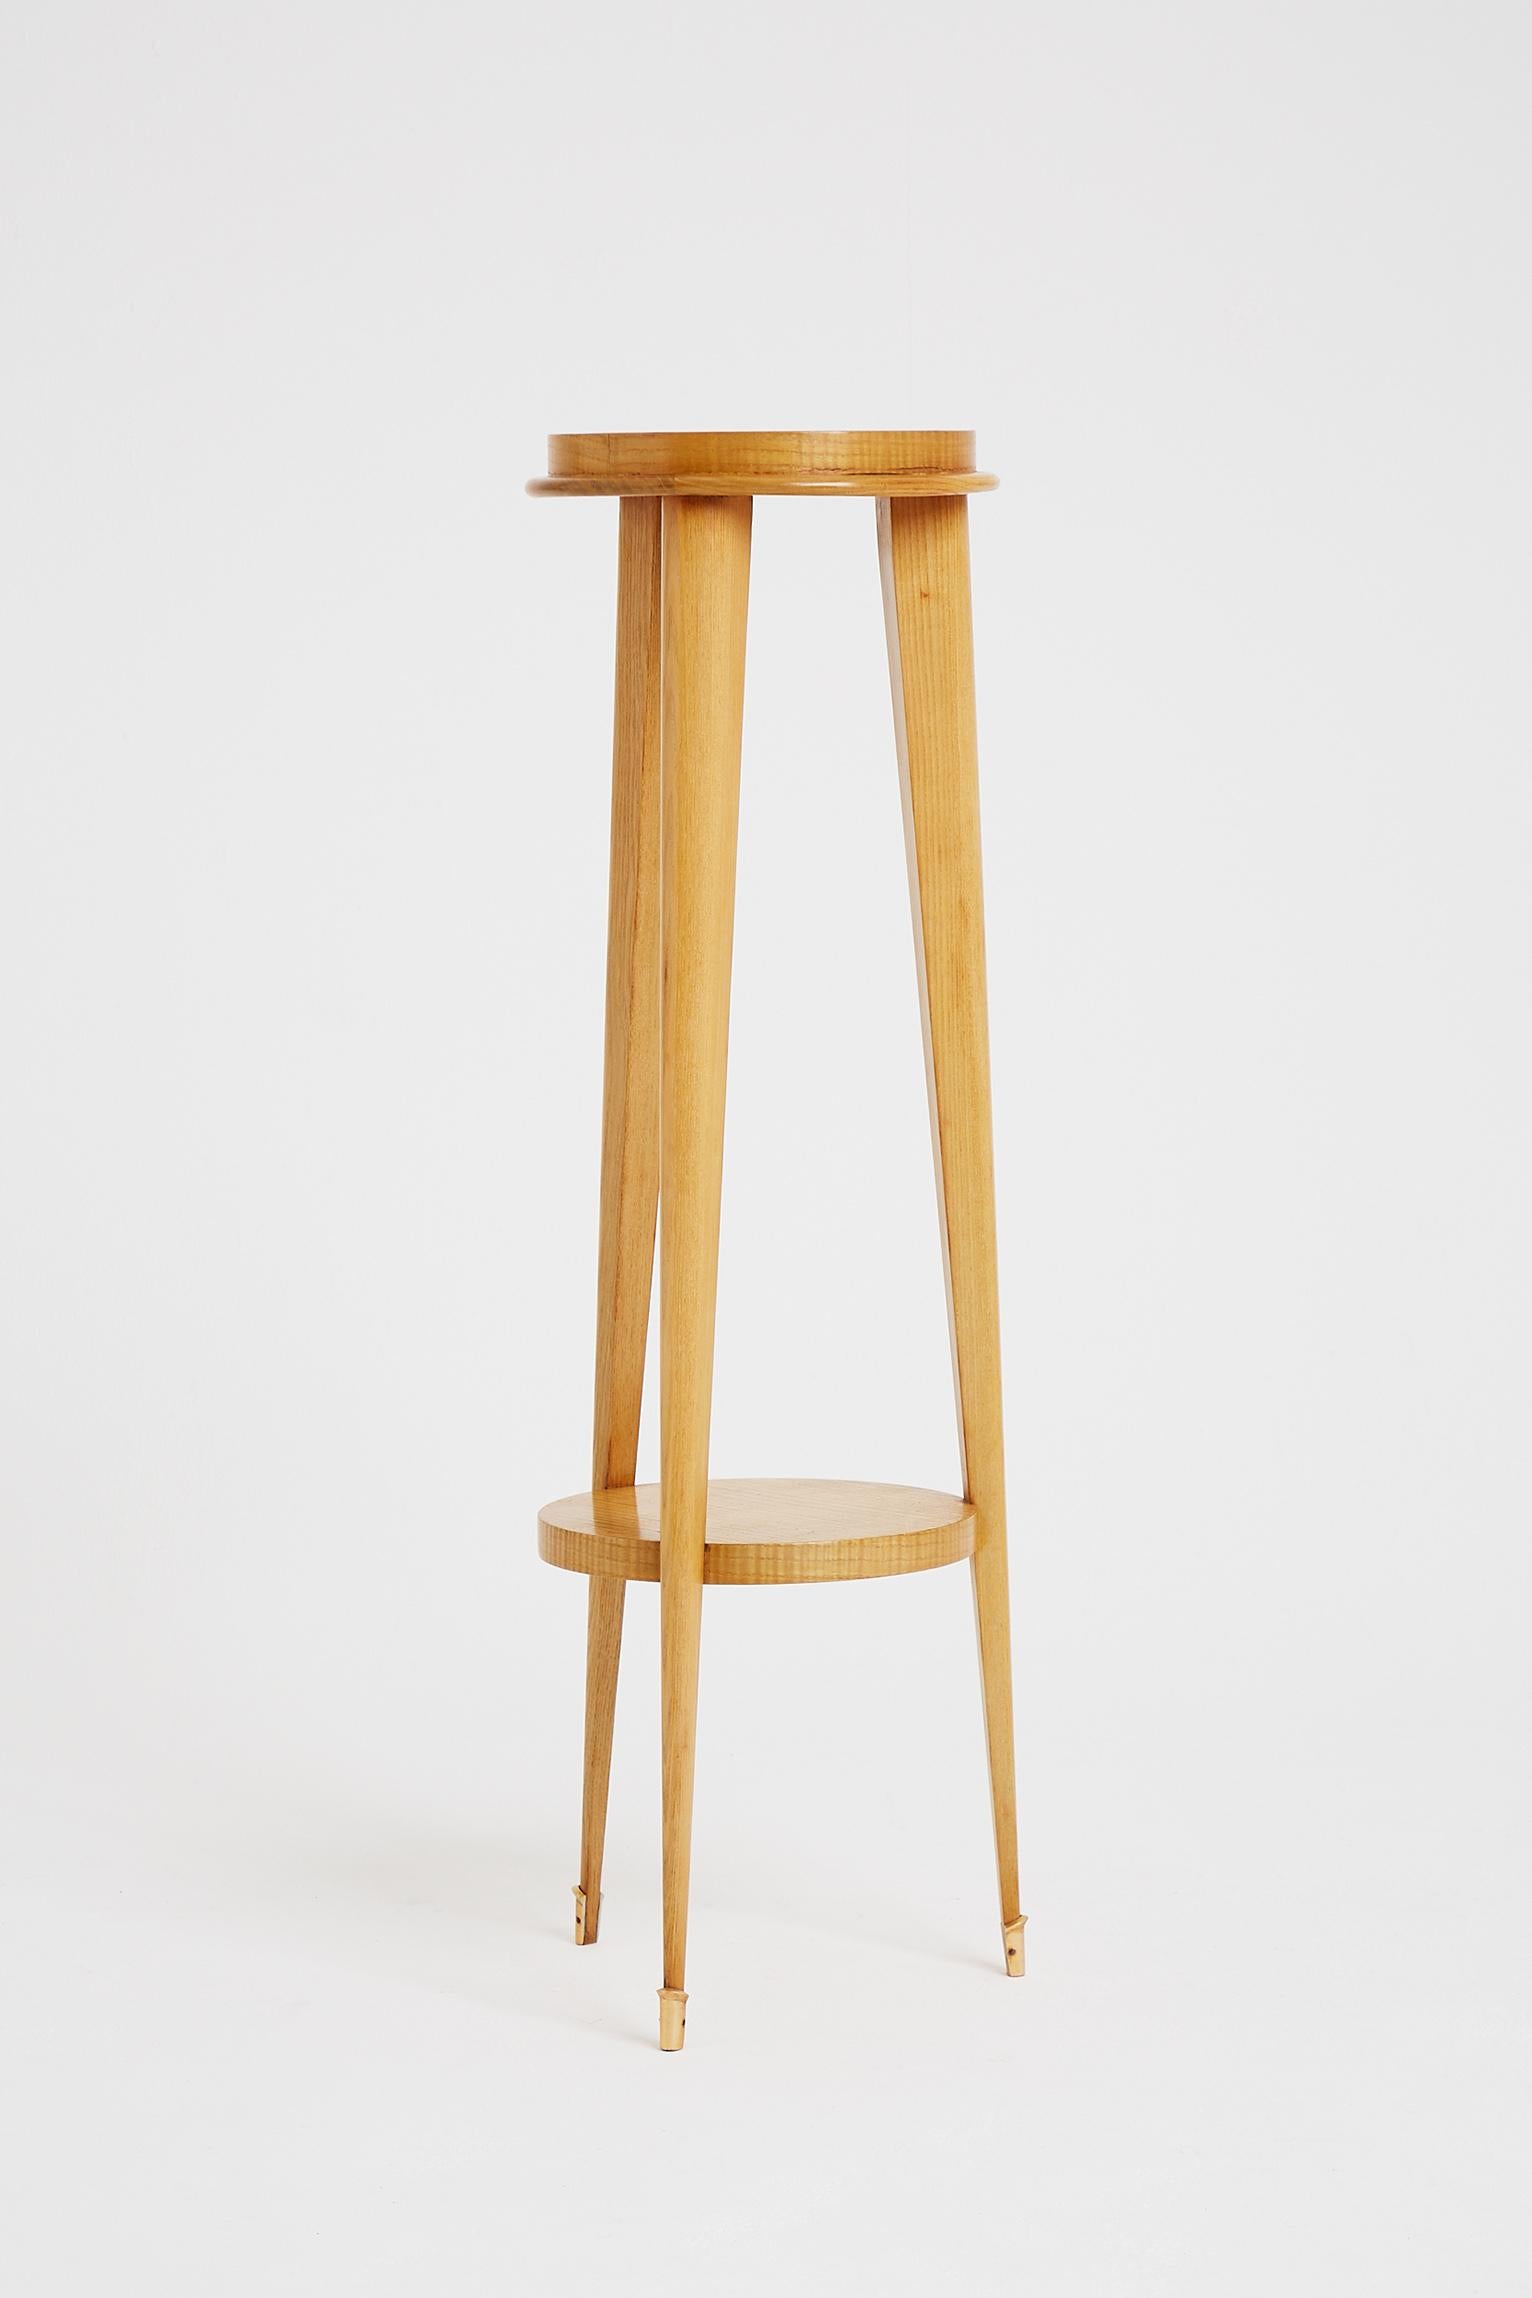 French Oak Pedestal by Maurice Jallot